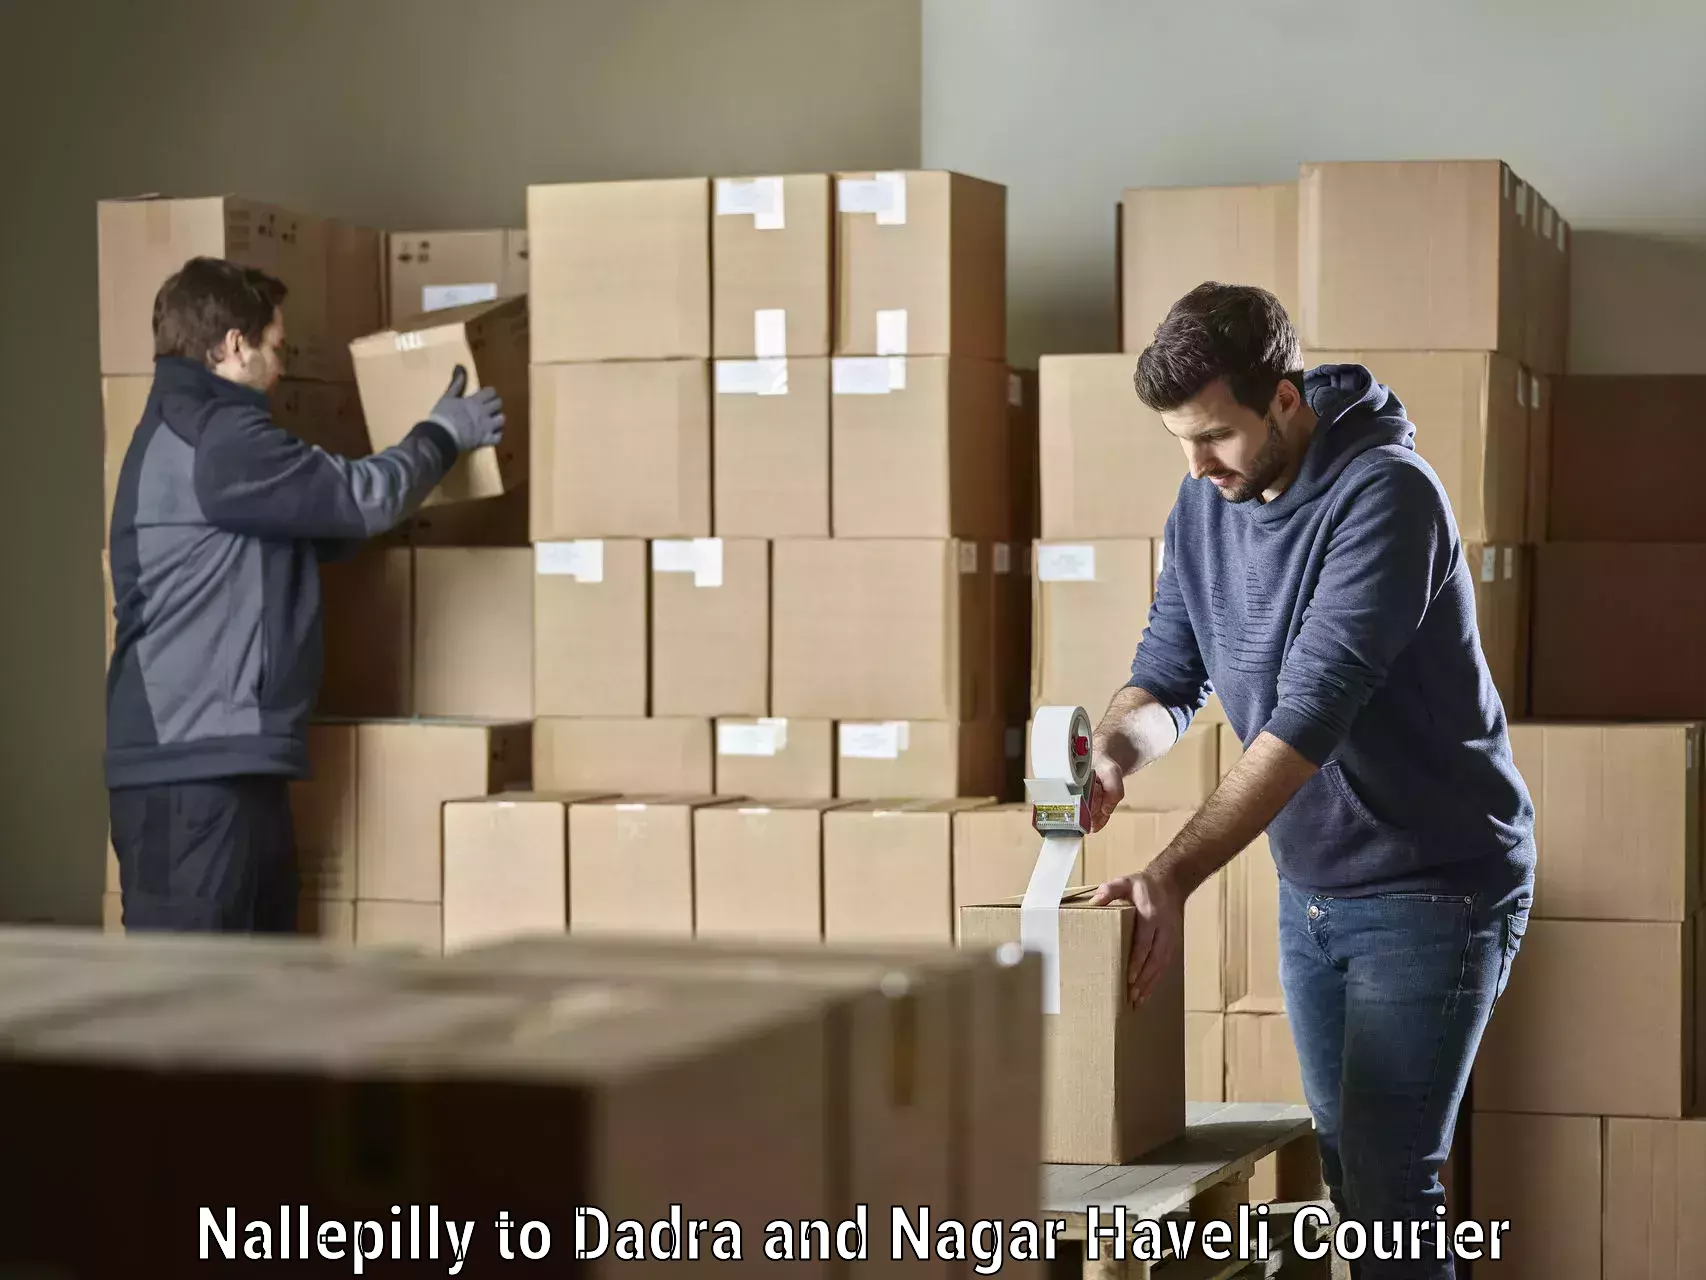 Nationwide parcel services Nallepilly to Dadra and Nagar Haveli